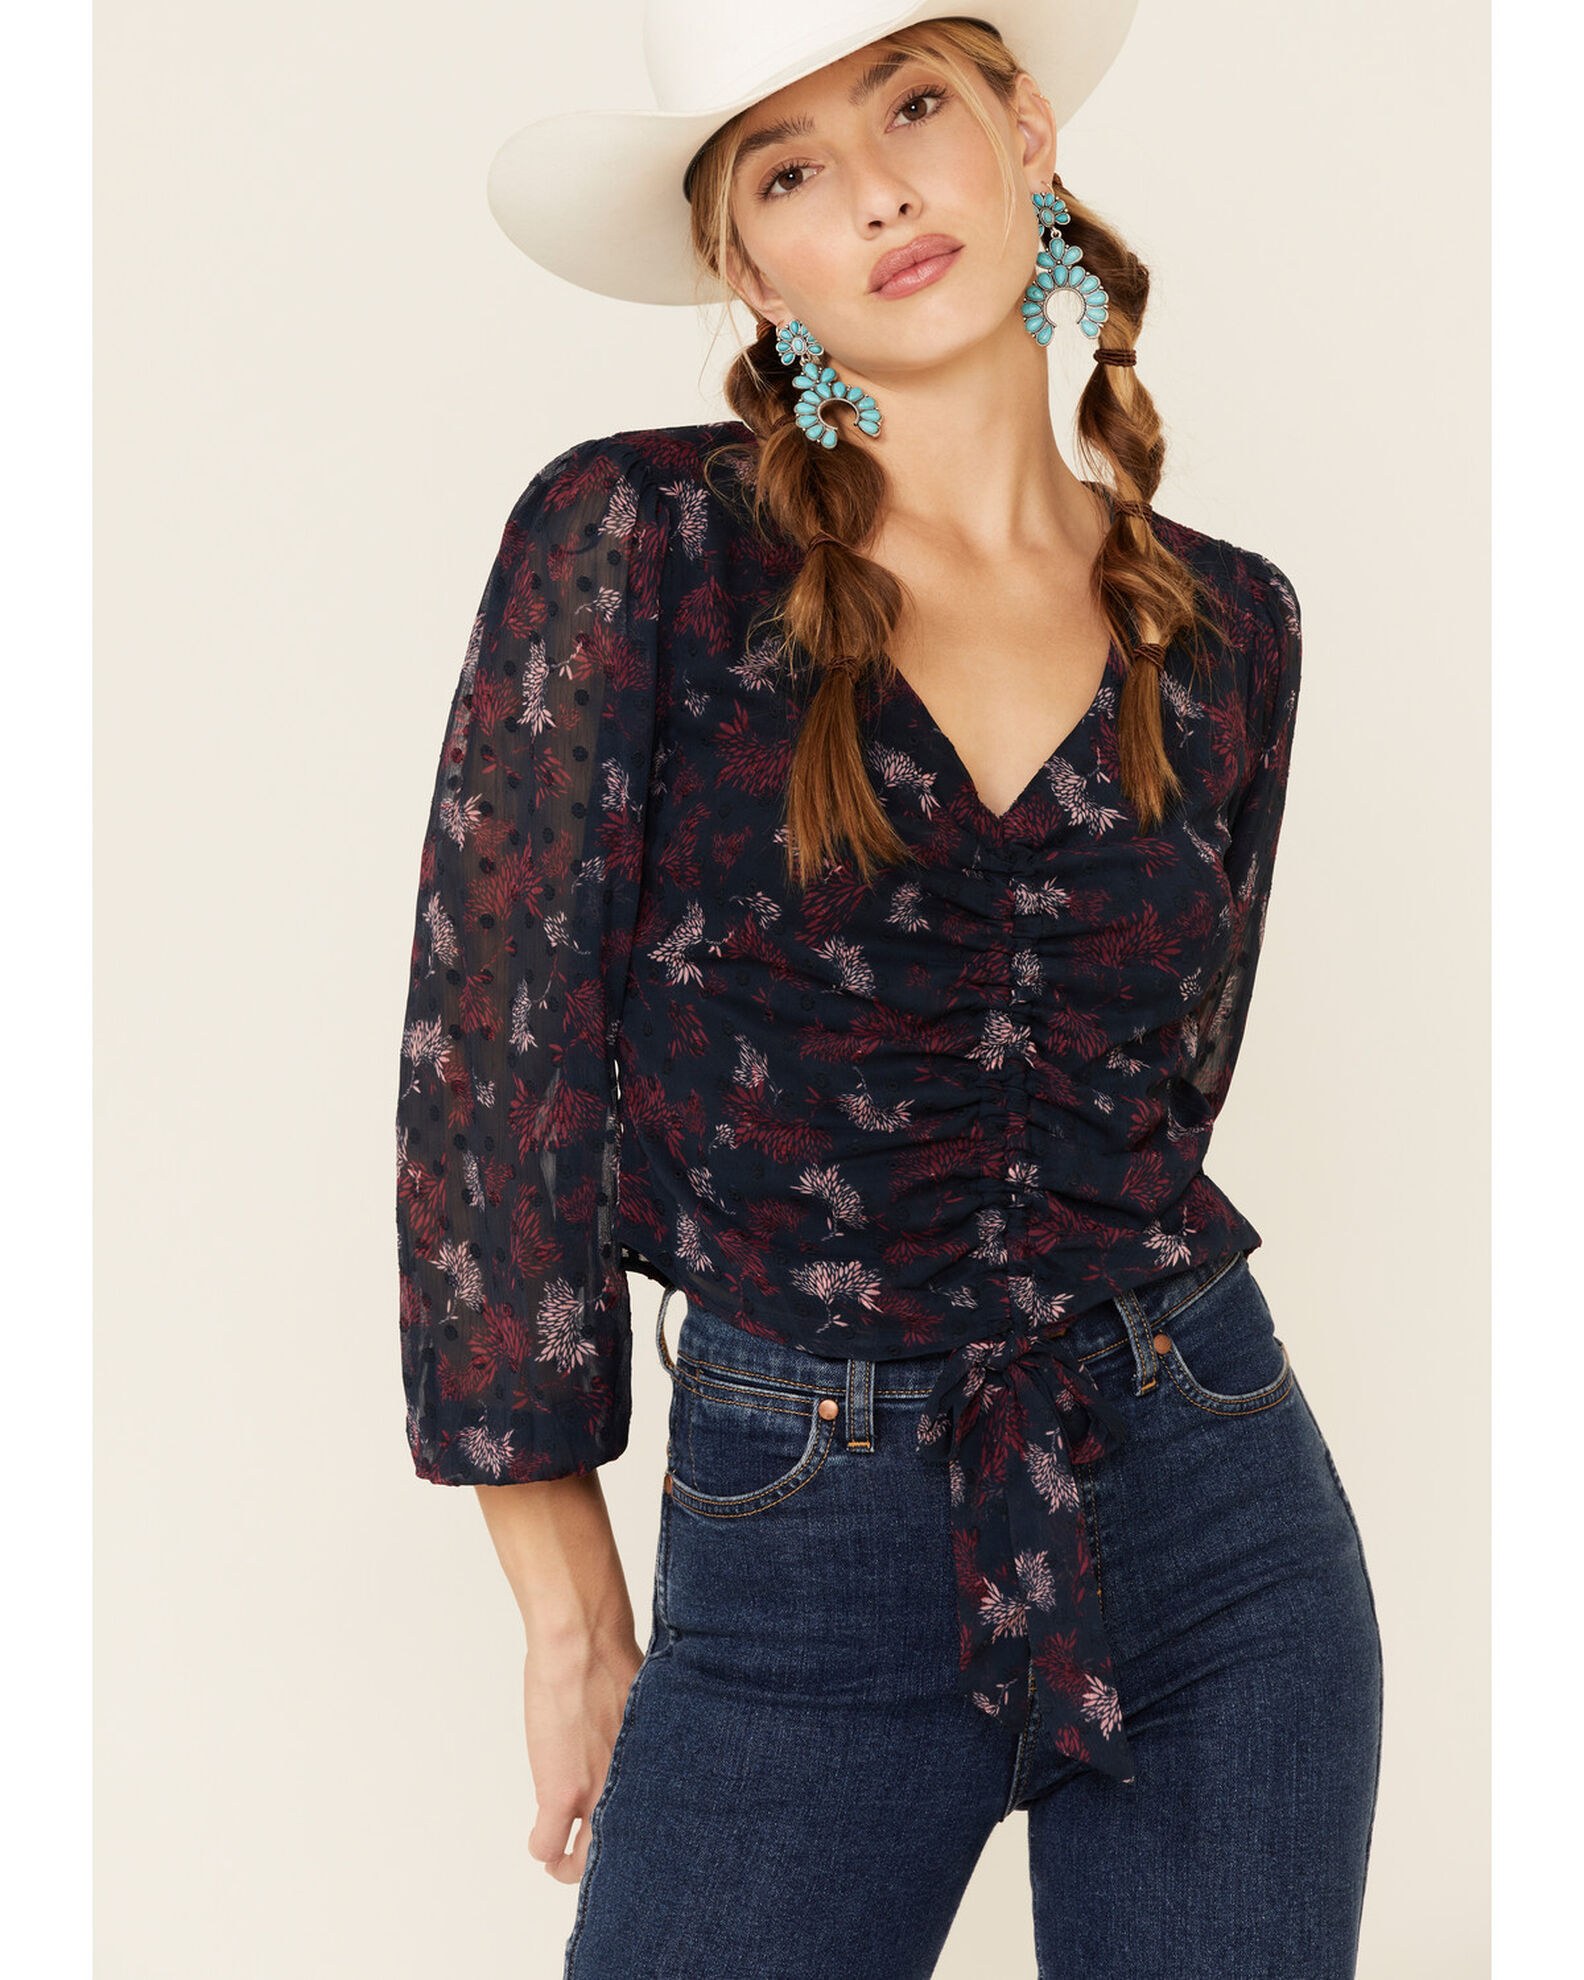 Sadie & Sage Women's Navy Floral Print Blouse - Country Outfitter